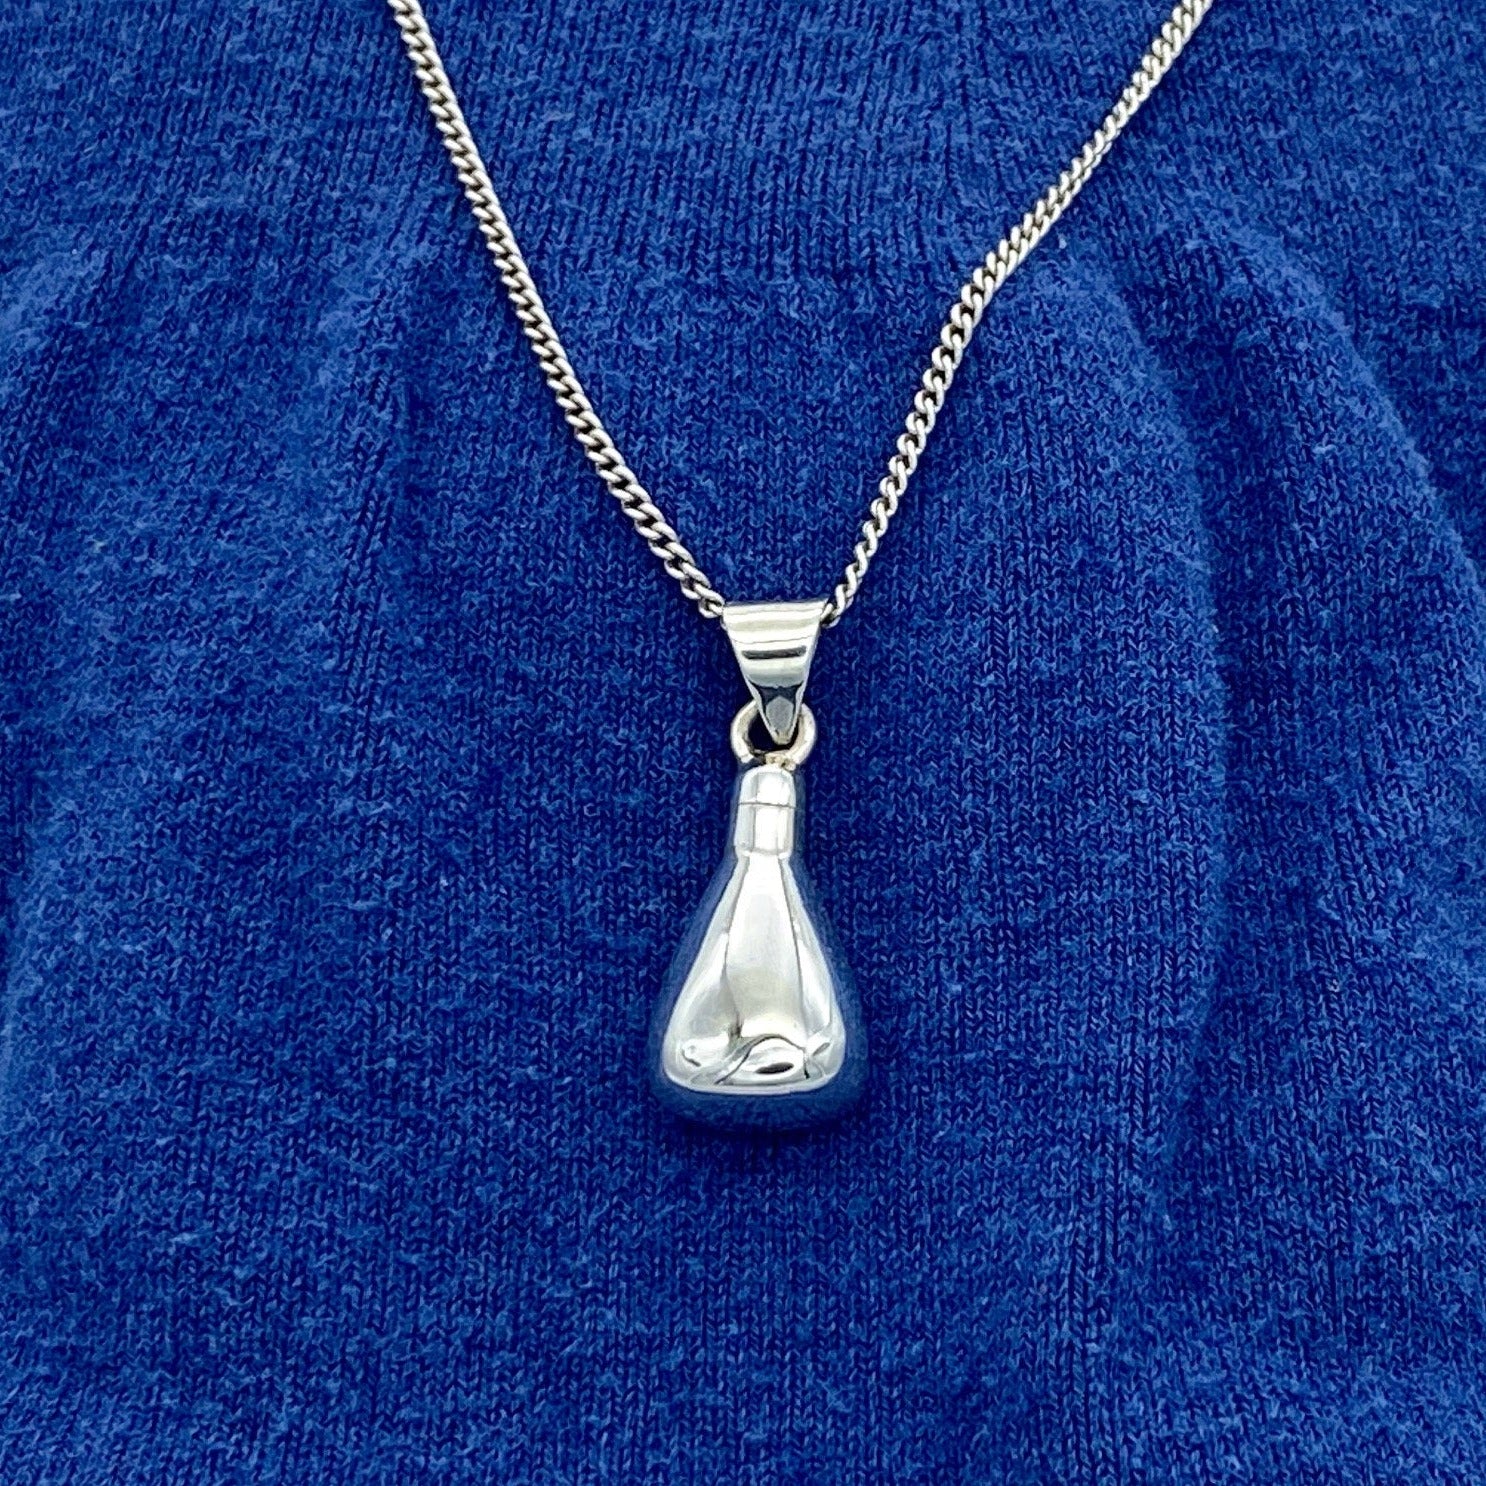 Silver Urn Pendant for Ashes, Urn Memorial Jewelry, Urn on a Chain, Urn for Ashes of a Long Lost Loved One. Urn to Remember Family Member